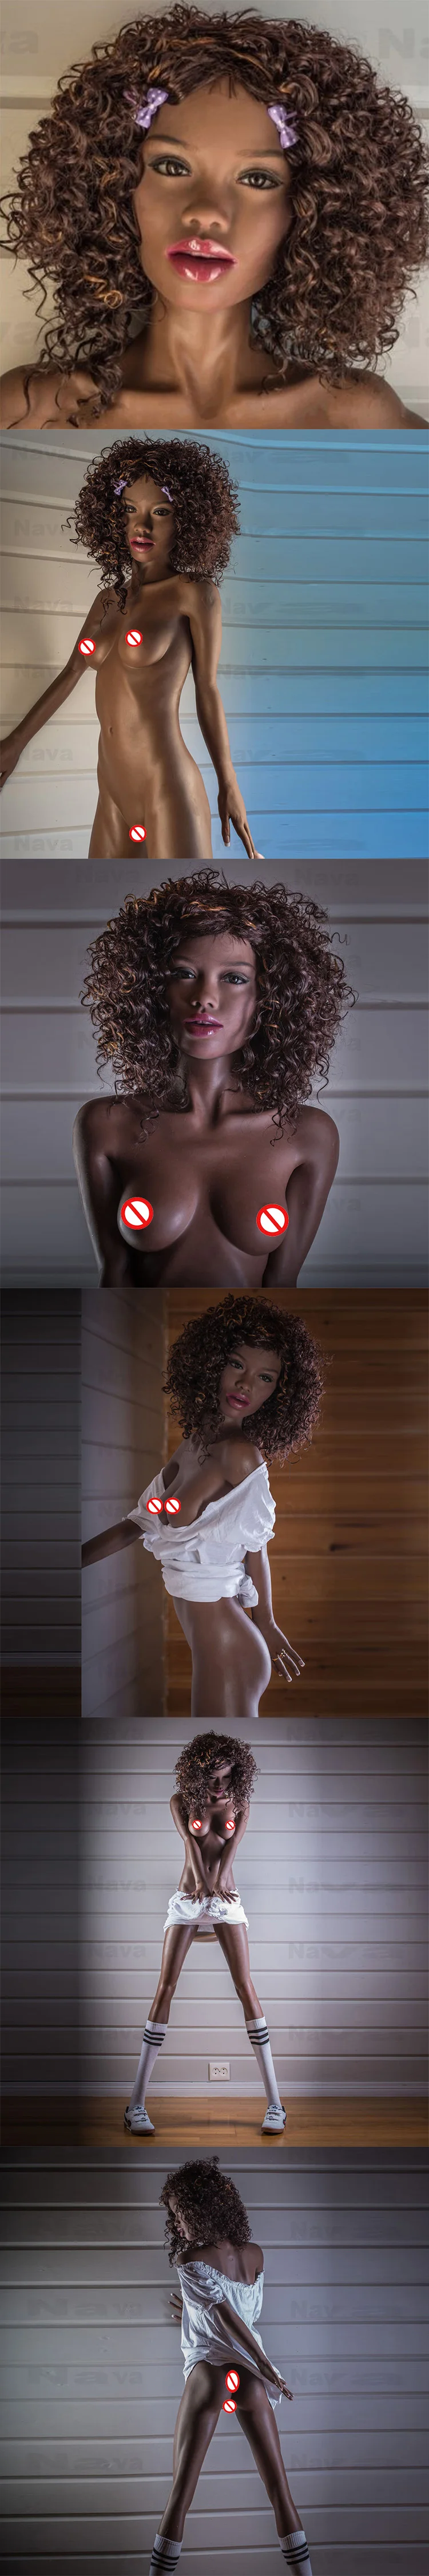 155cm Real Vagina Sex Doll Small Breast, Real Doll Silicone Sex Dolls for Men, Busty Sex Doll Black Girl